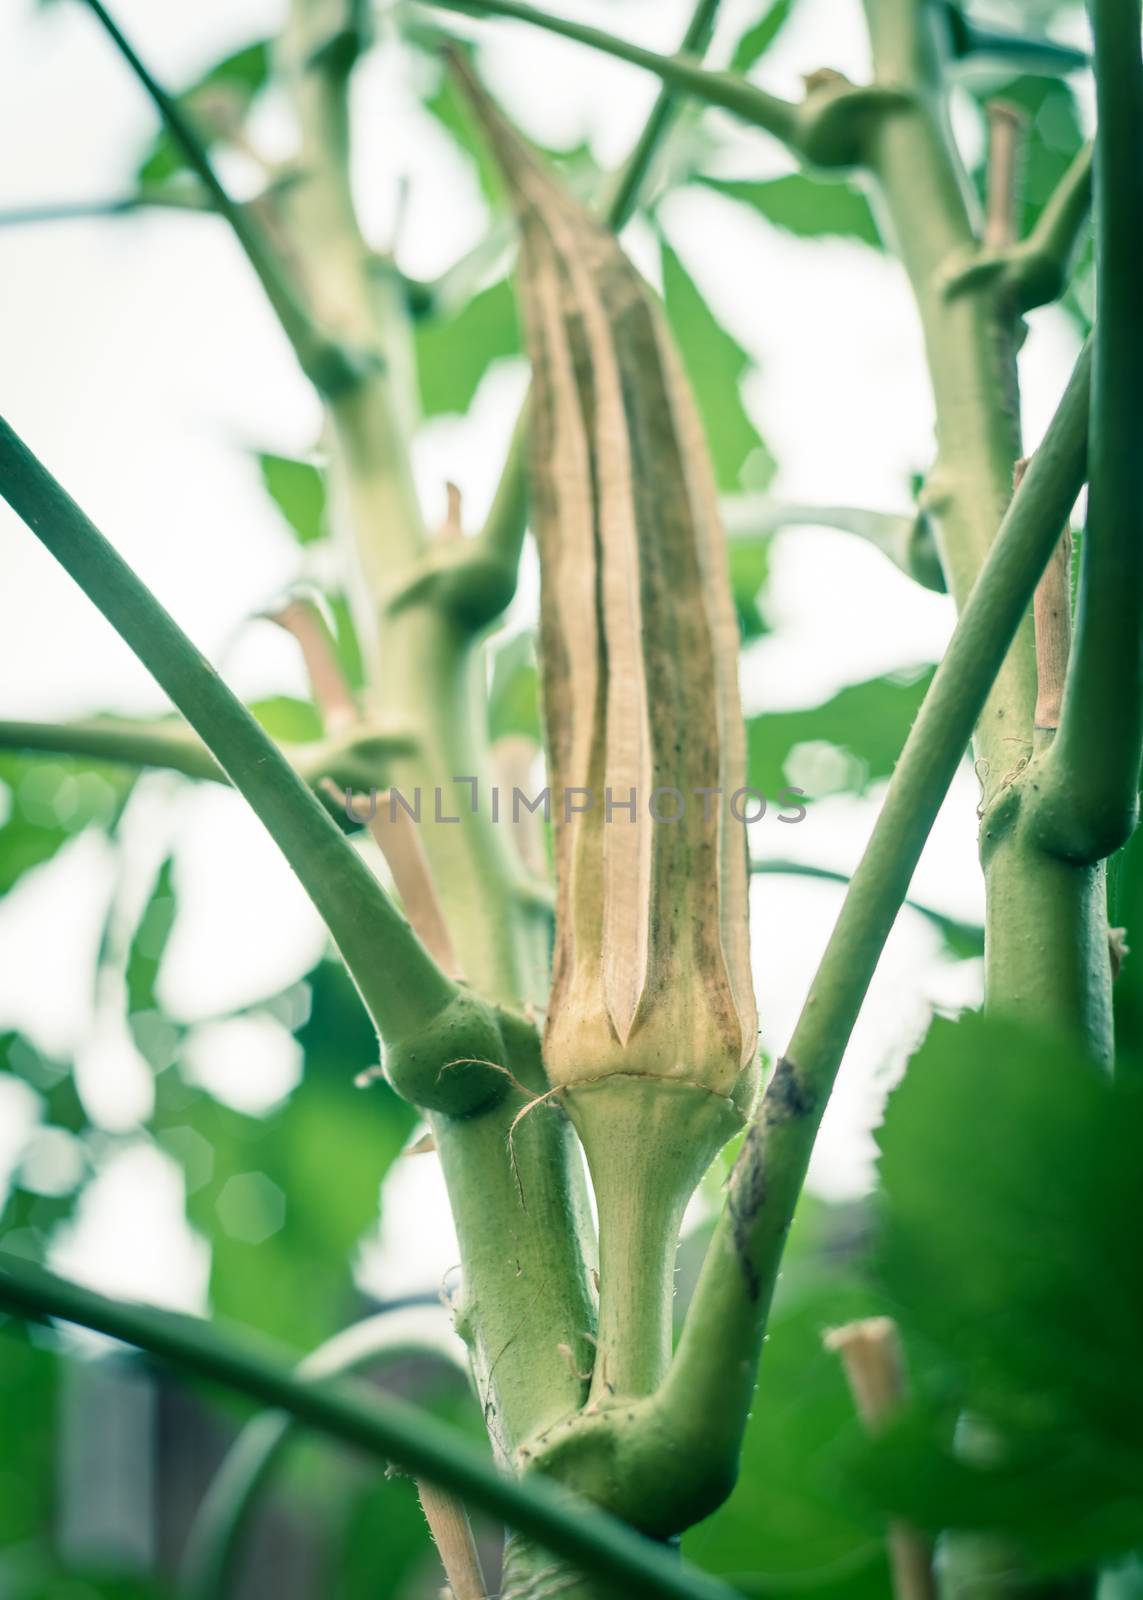 Lookup view of a dry okra pod on plant for saving okra seeds. Traditional way to collect lady fingers seeds and dry out harvesting, storing at organic backyard garden near Dallas, Texas, USA